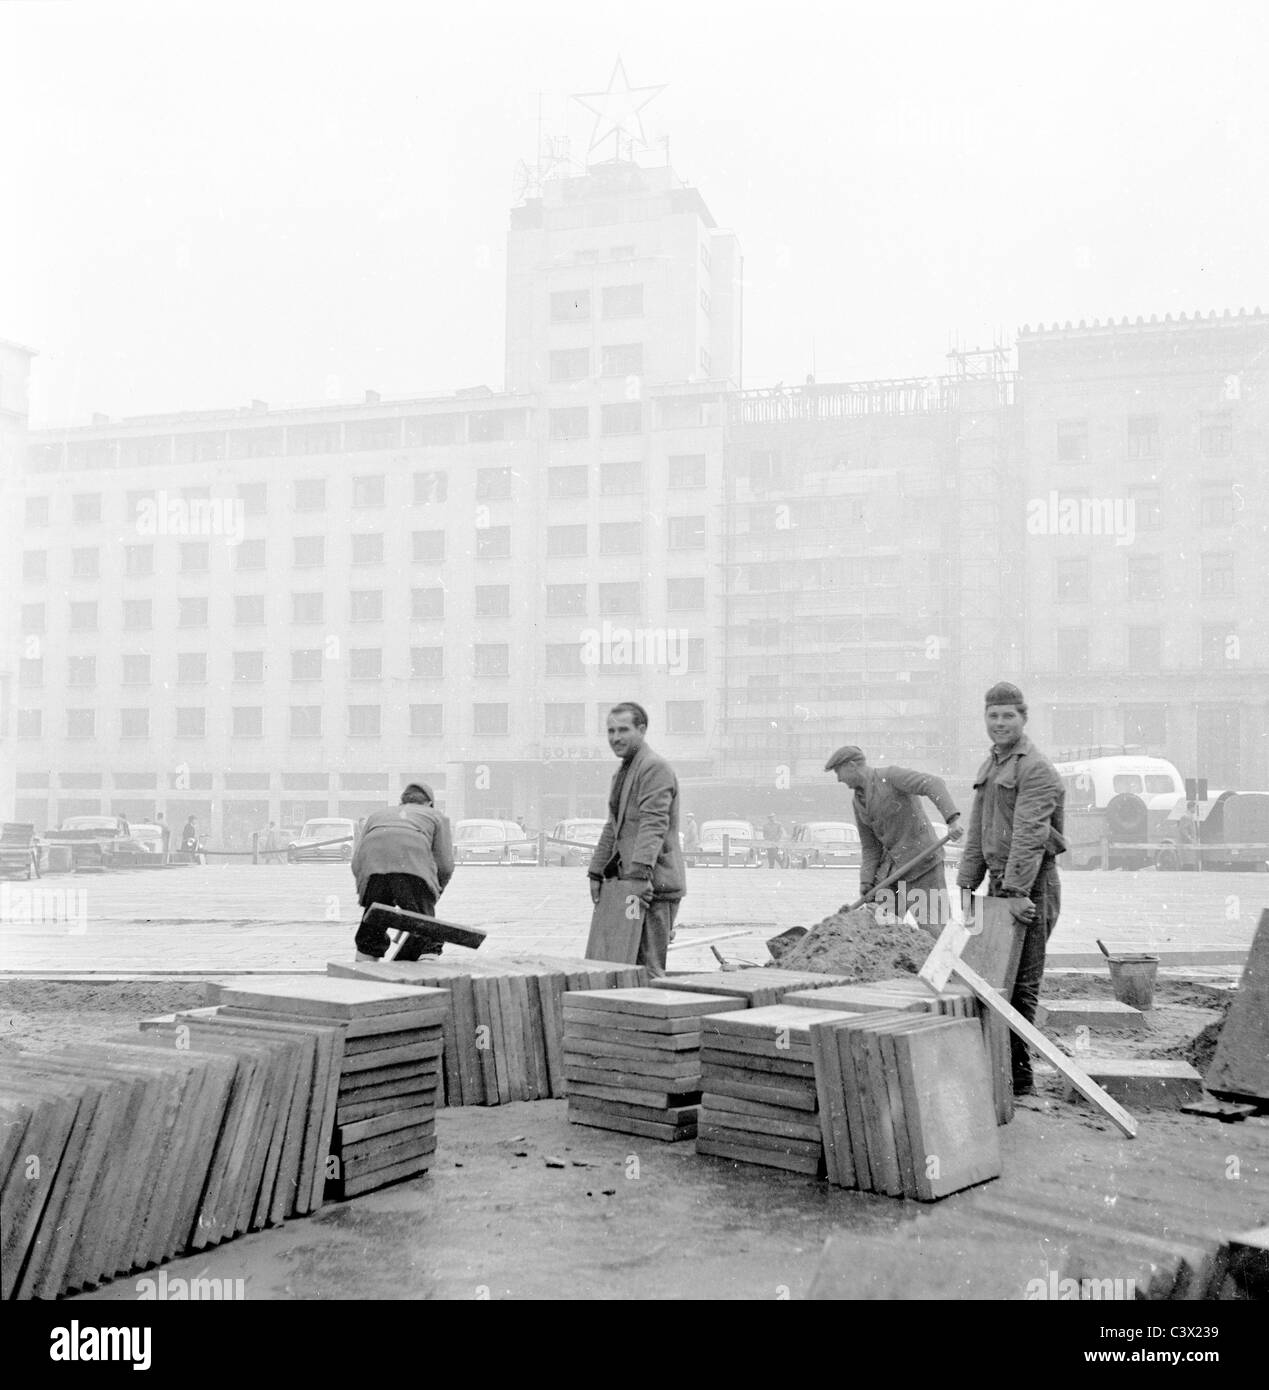 Workmen laying paving stones in a town in Yugoslavia, in this historical picture taken in the 1950s by J. Allan Cash. Stock Photo